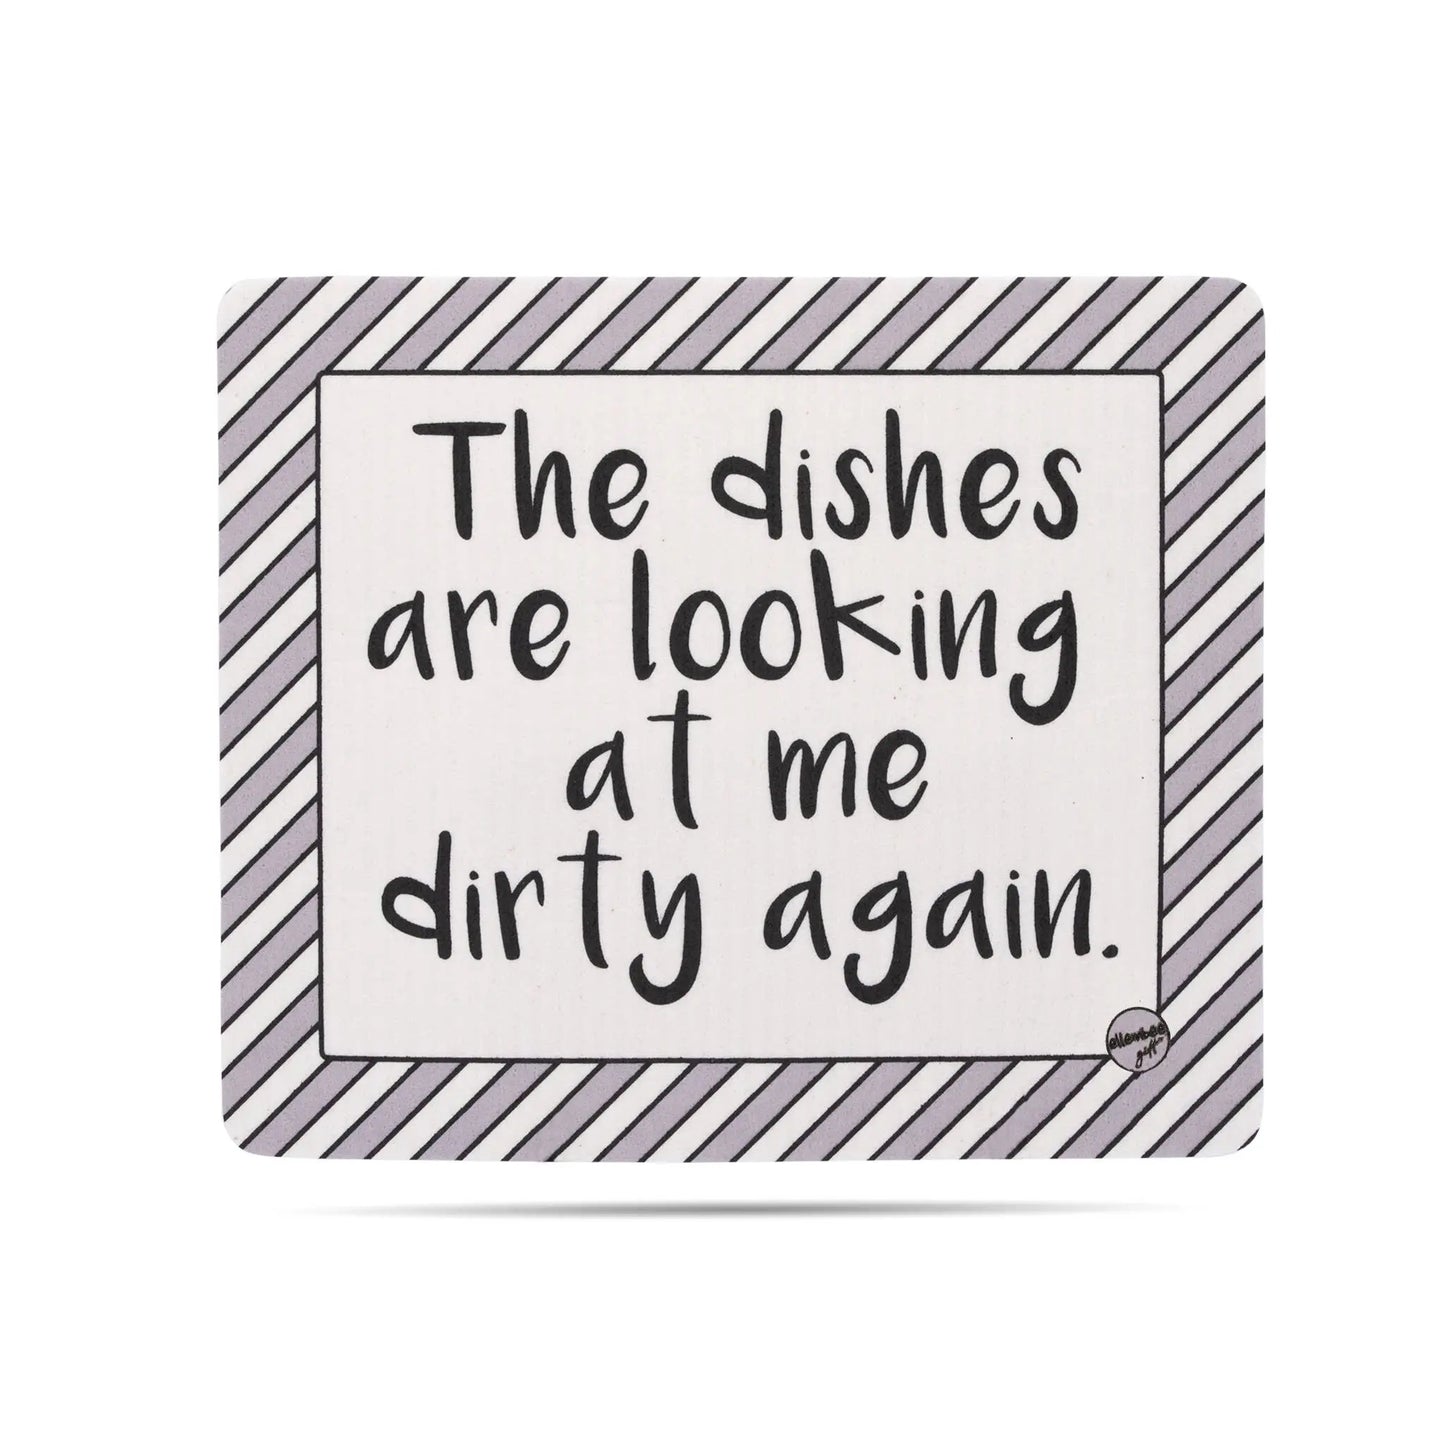 The Dishes are Looking at Me Dirty Again Swedish Dishcloth ellembee gift